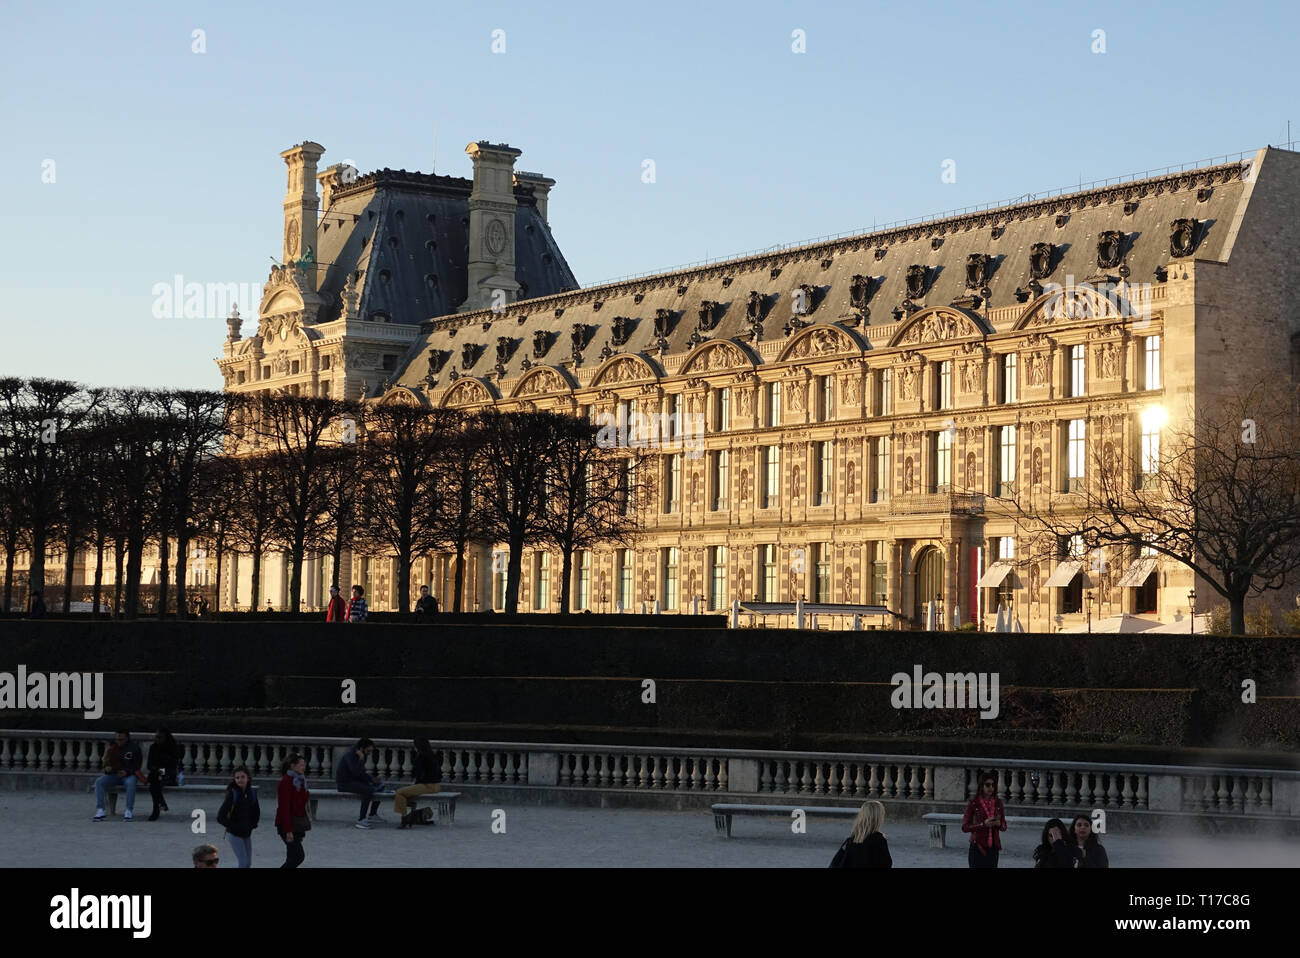 PARIS-FRANCE-FEB 25, 2019: The Louvre is the world's largest art museum and a historic monument in Paris, France. Stock Photo